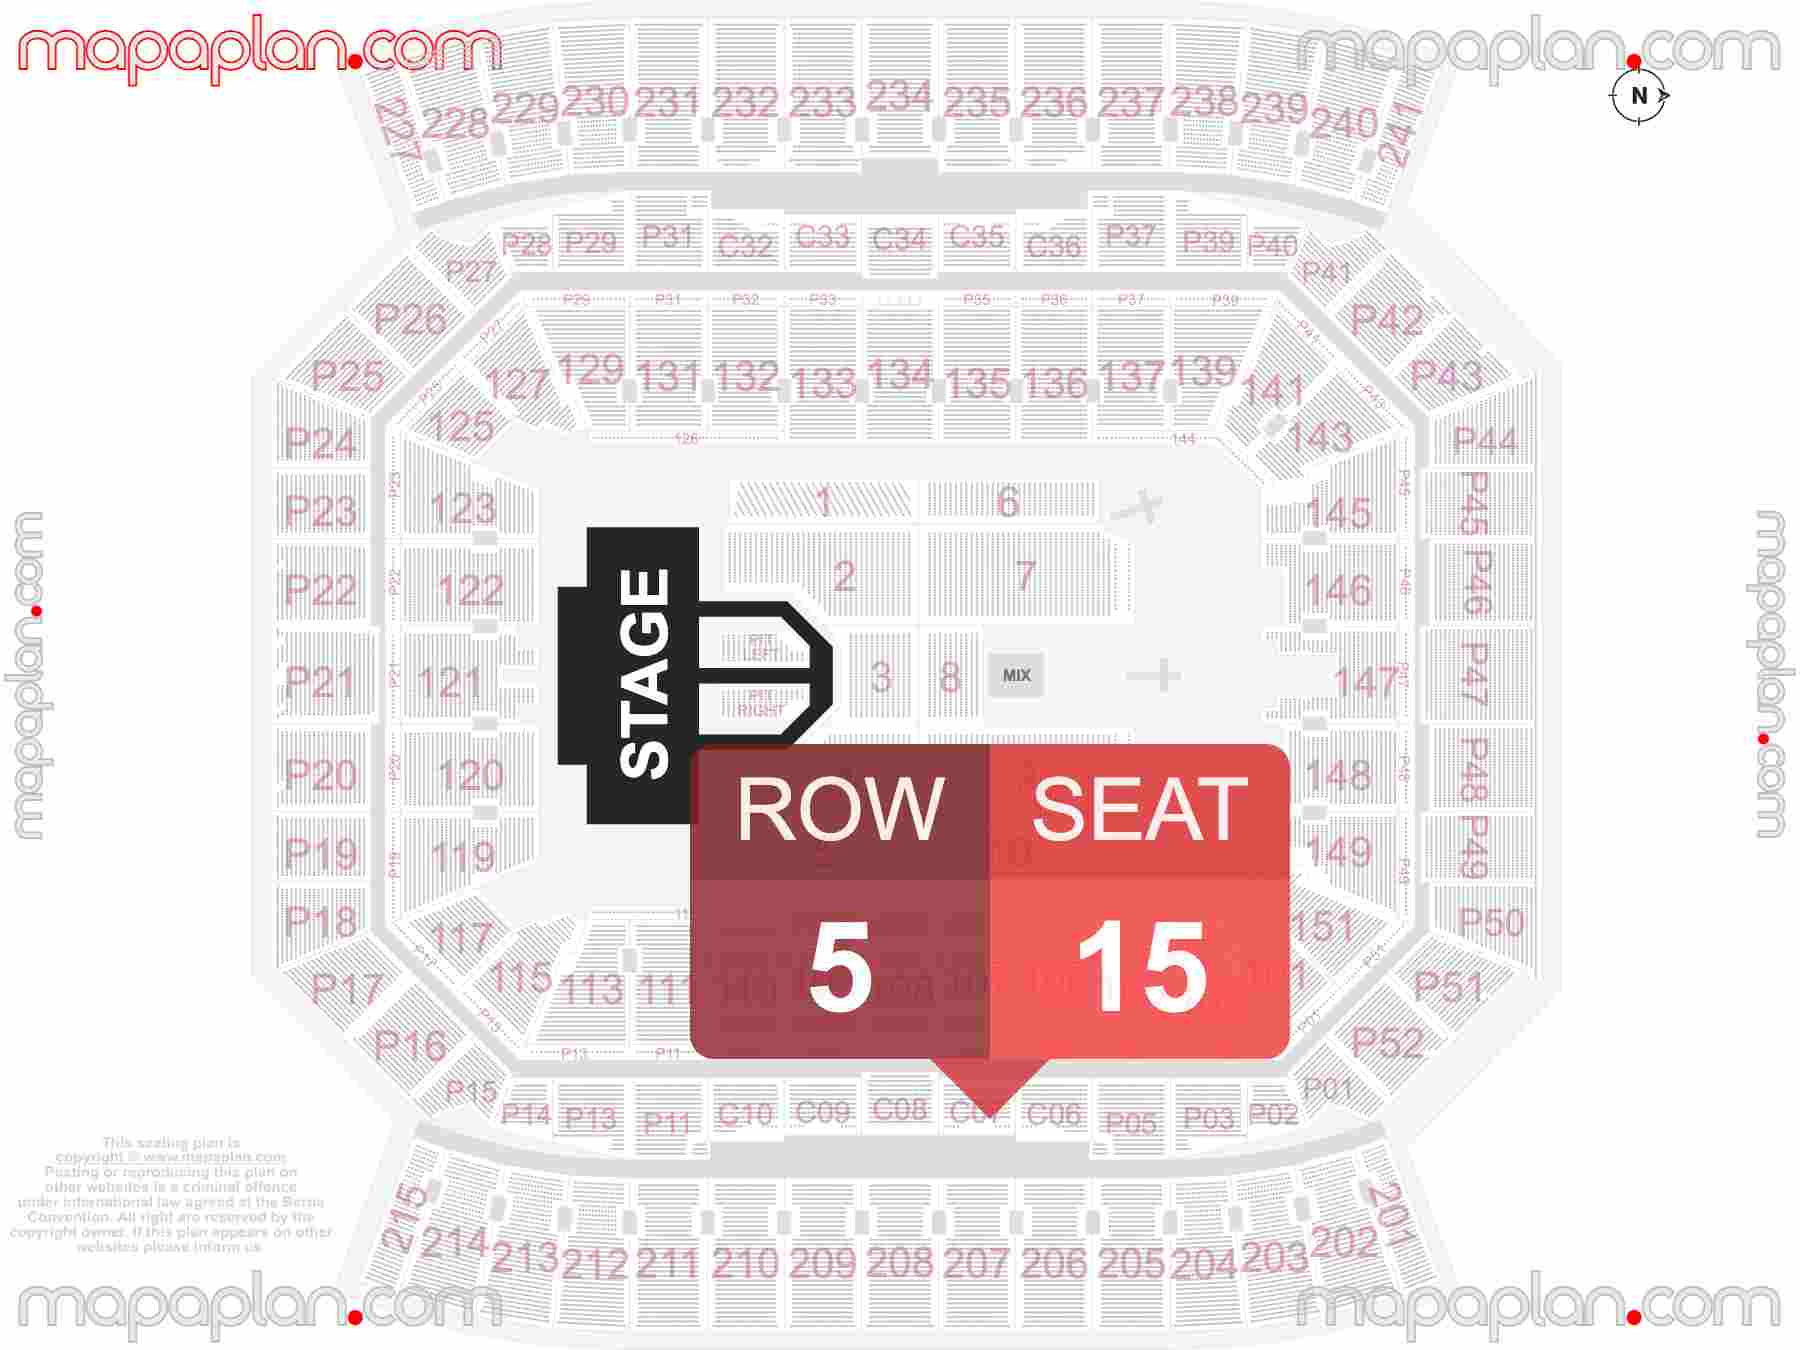 Orlando Camping World Stadium seating chart Concert with fully seated floor map find best seats row numbering system plan showing how many seats per row - Individual 'find my seat' virtual locator